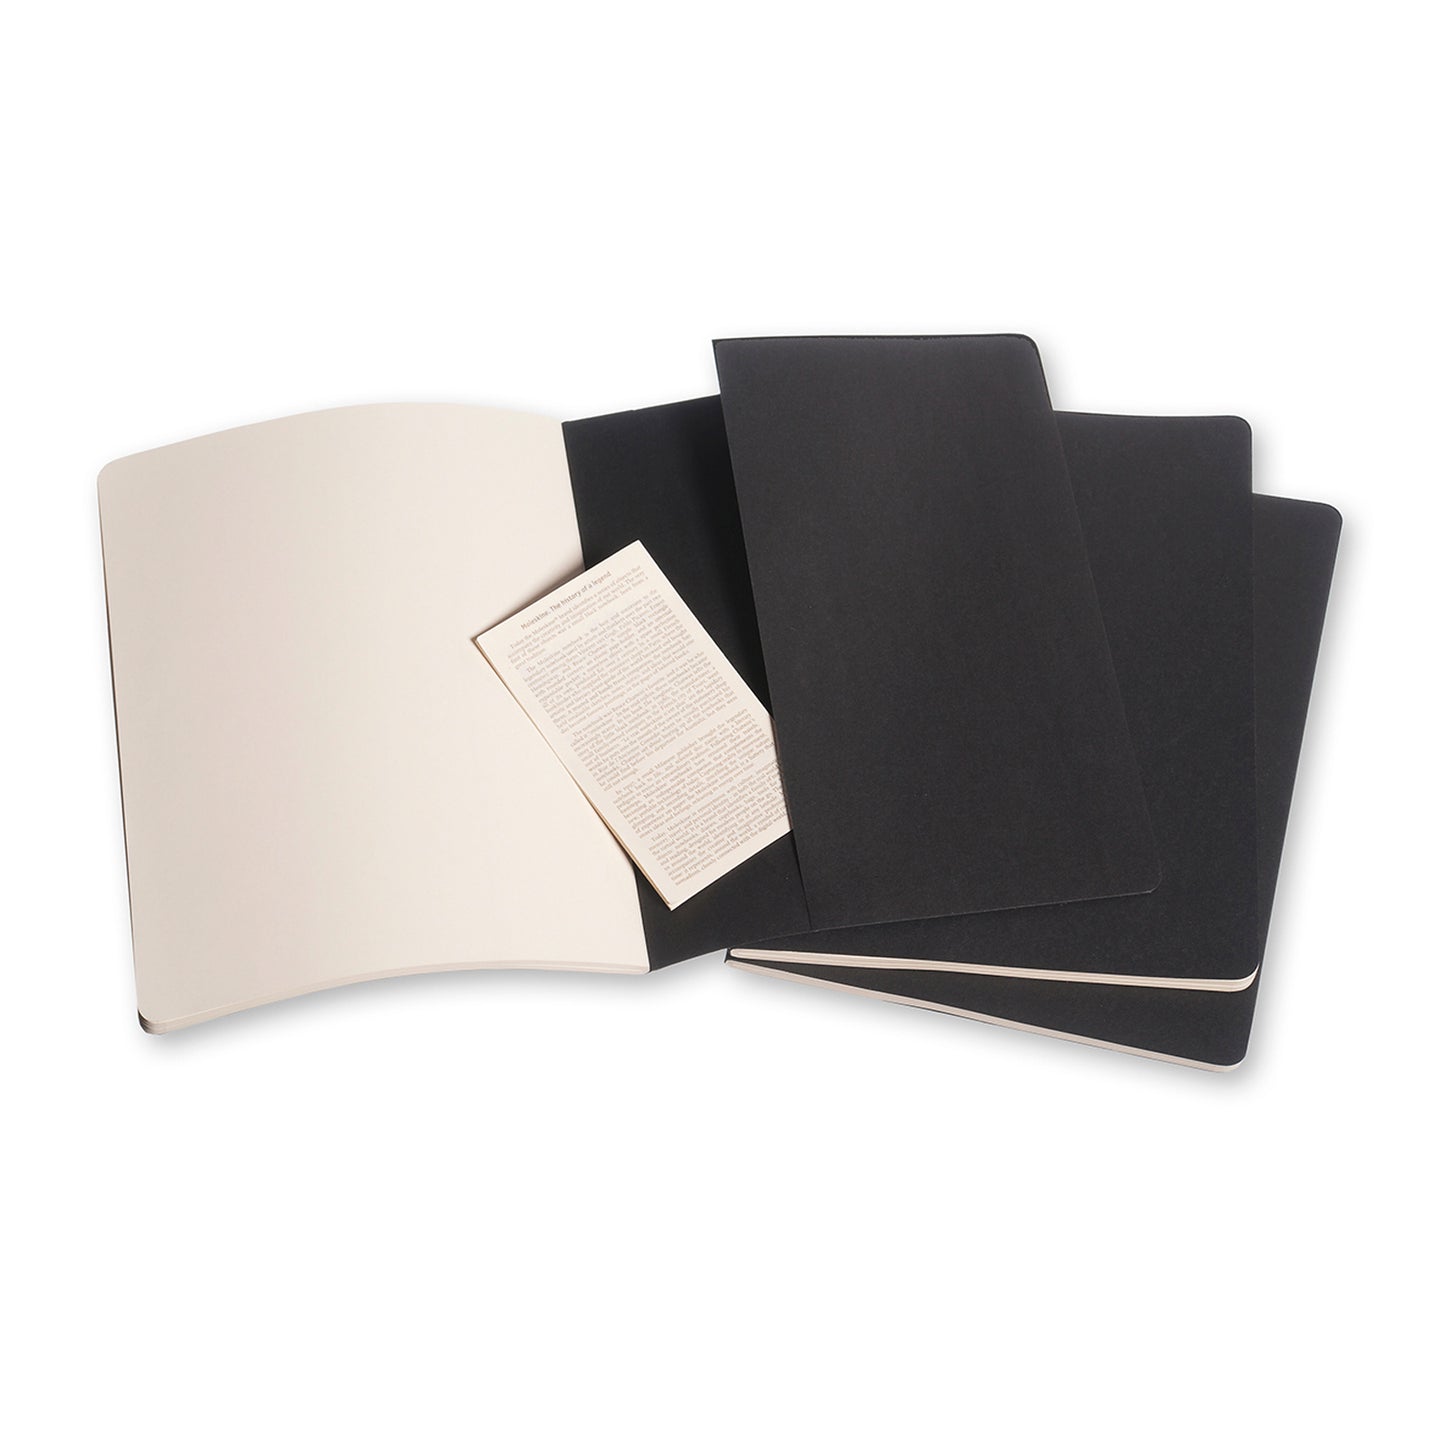 Cahier Extra Large Notebook Set Black